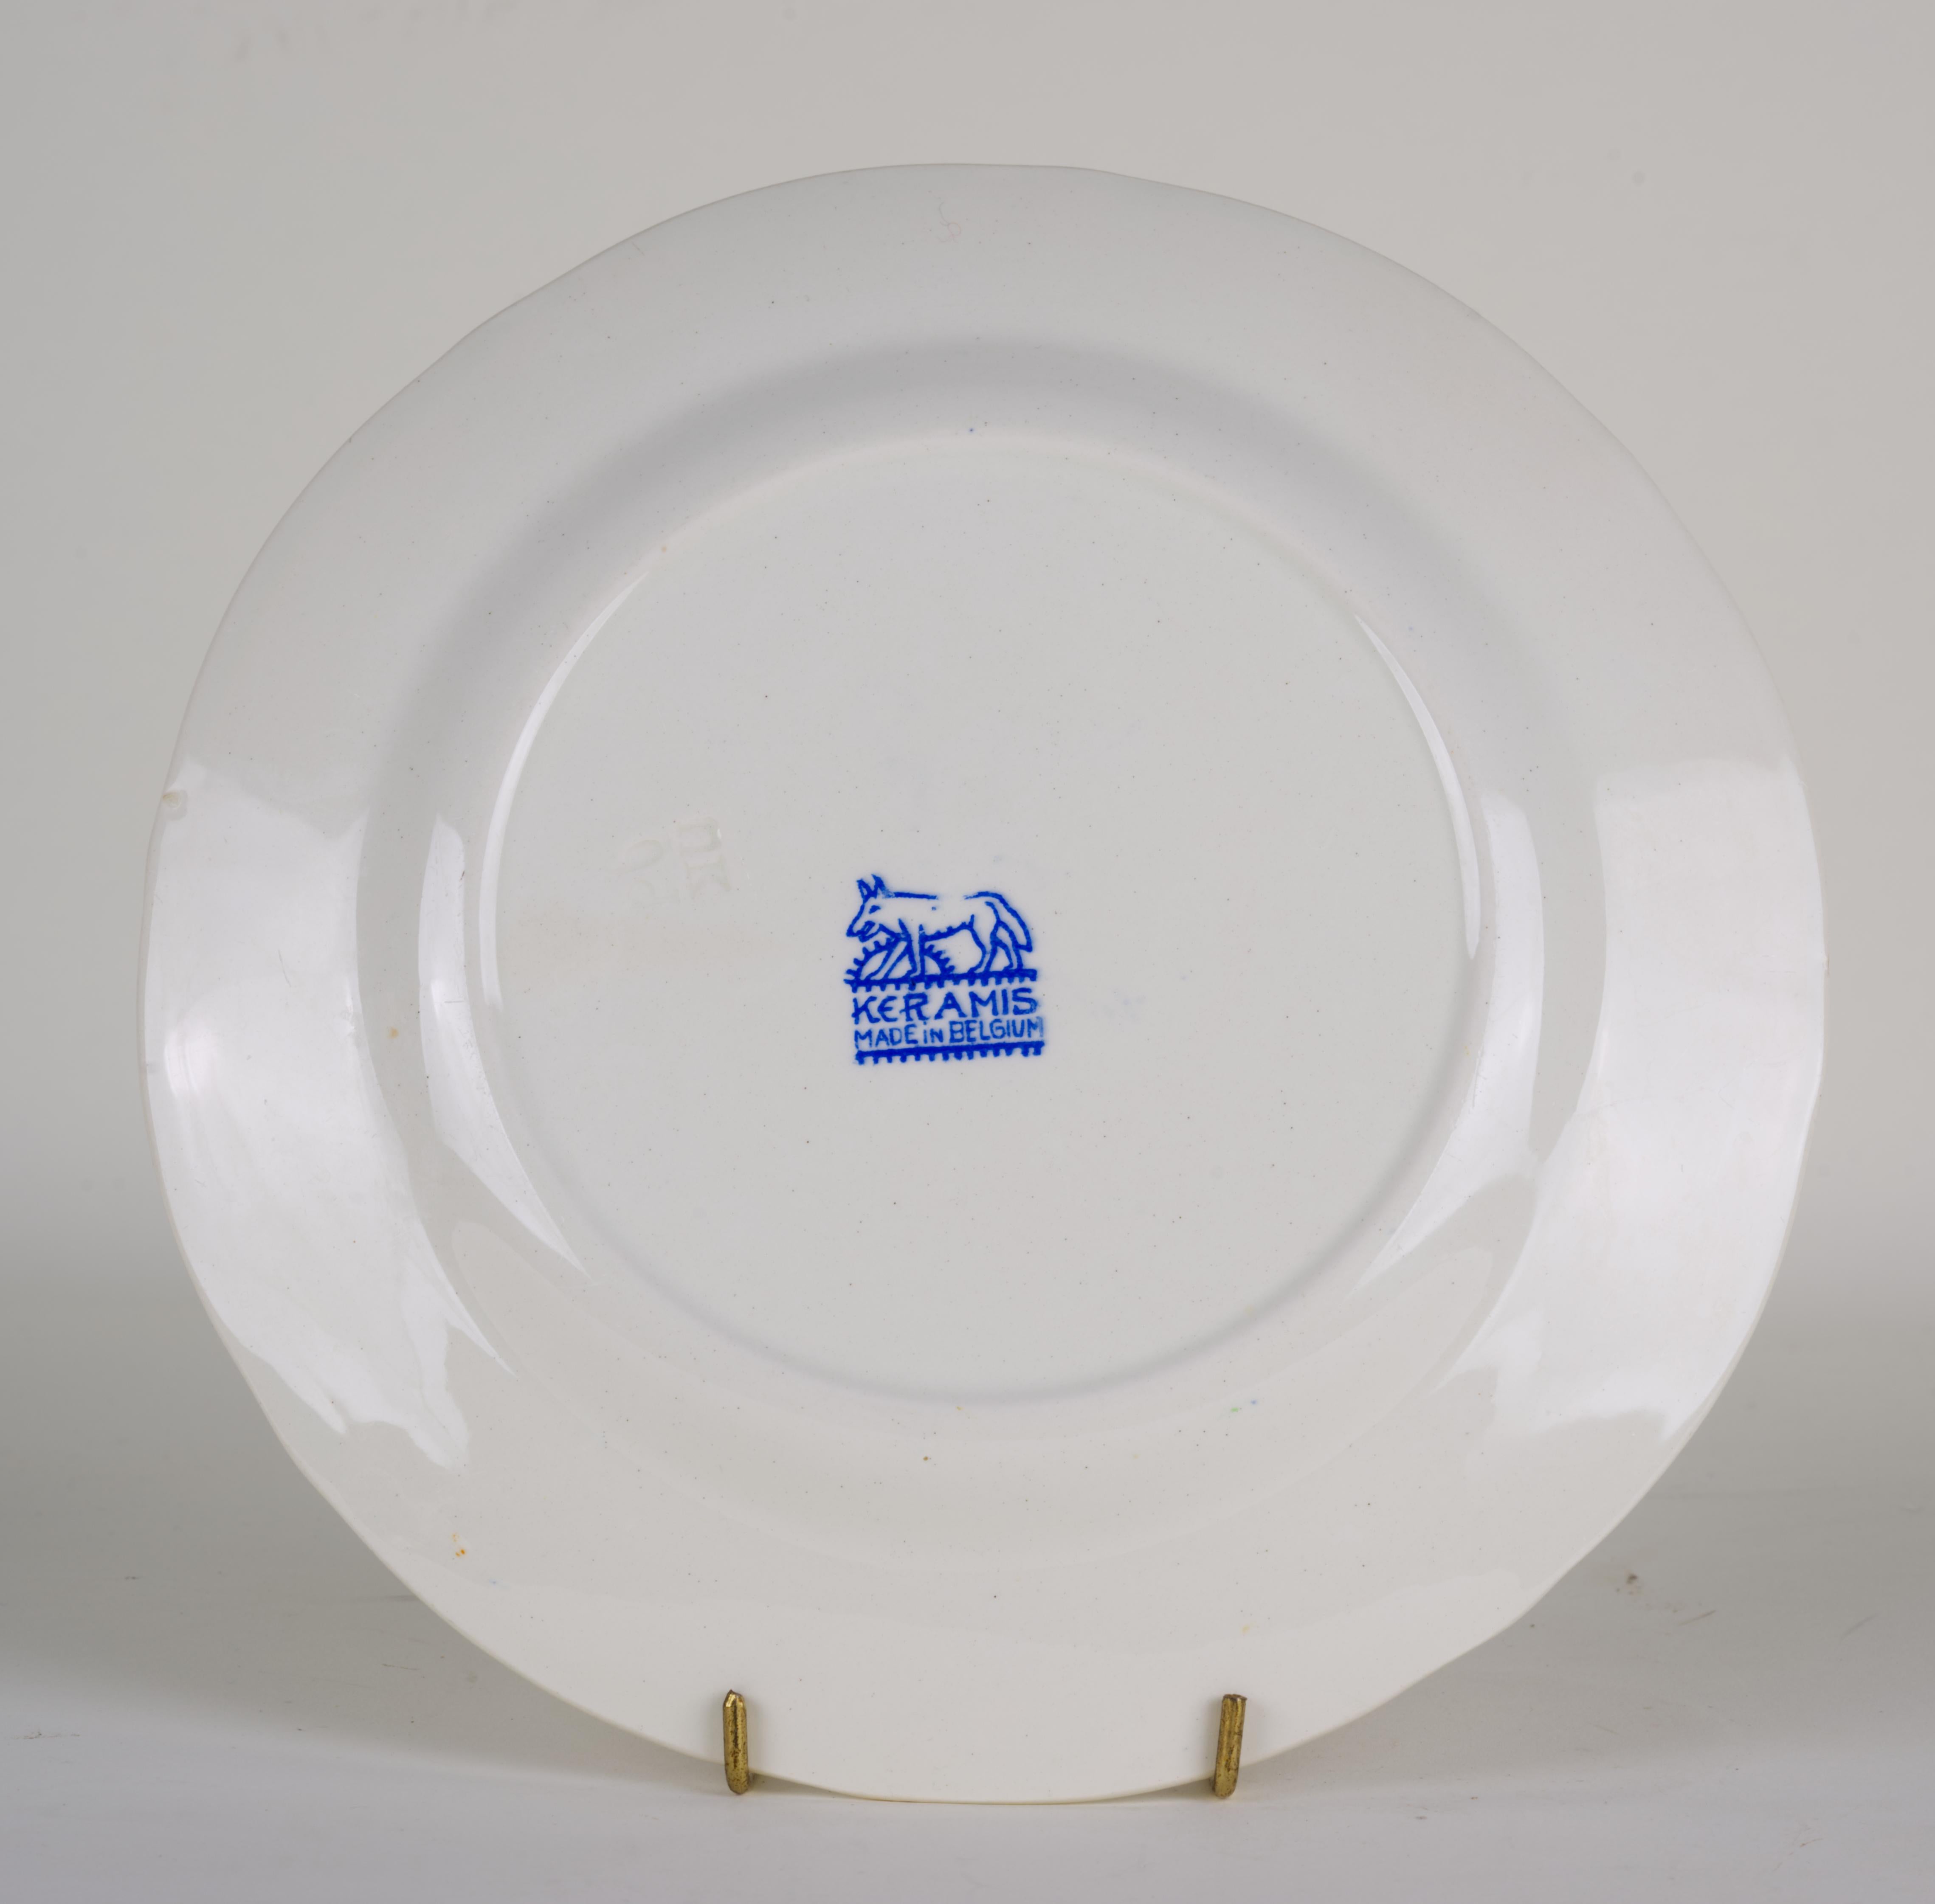 Porcelain Charles Catteau for Boch Freres Keramis, Set of 4 Faience salad Plates, Art Deco For Sale